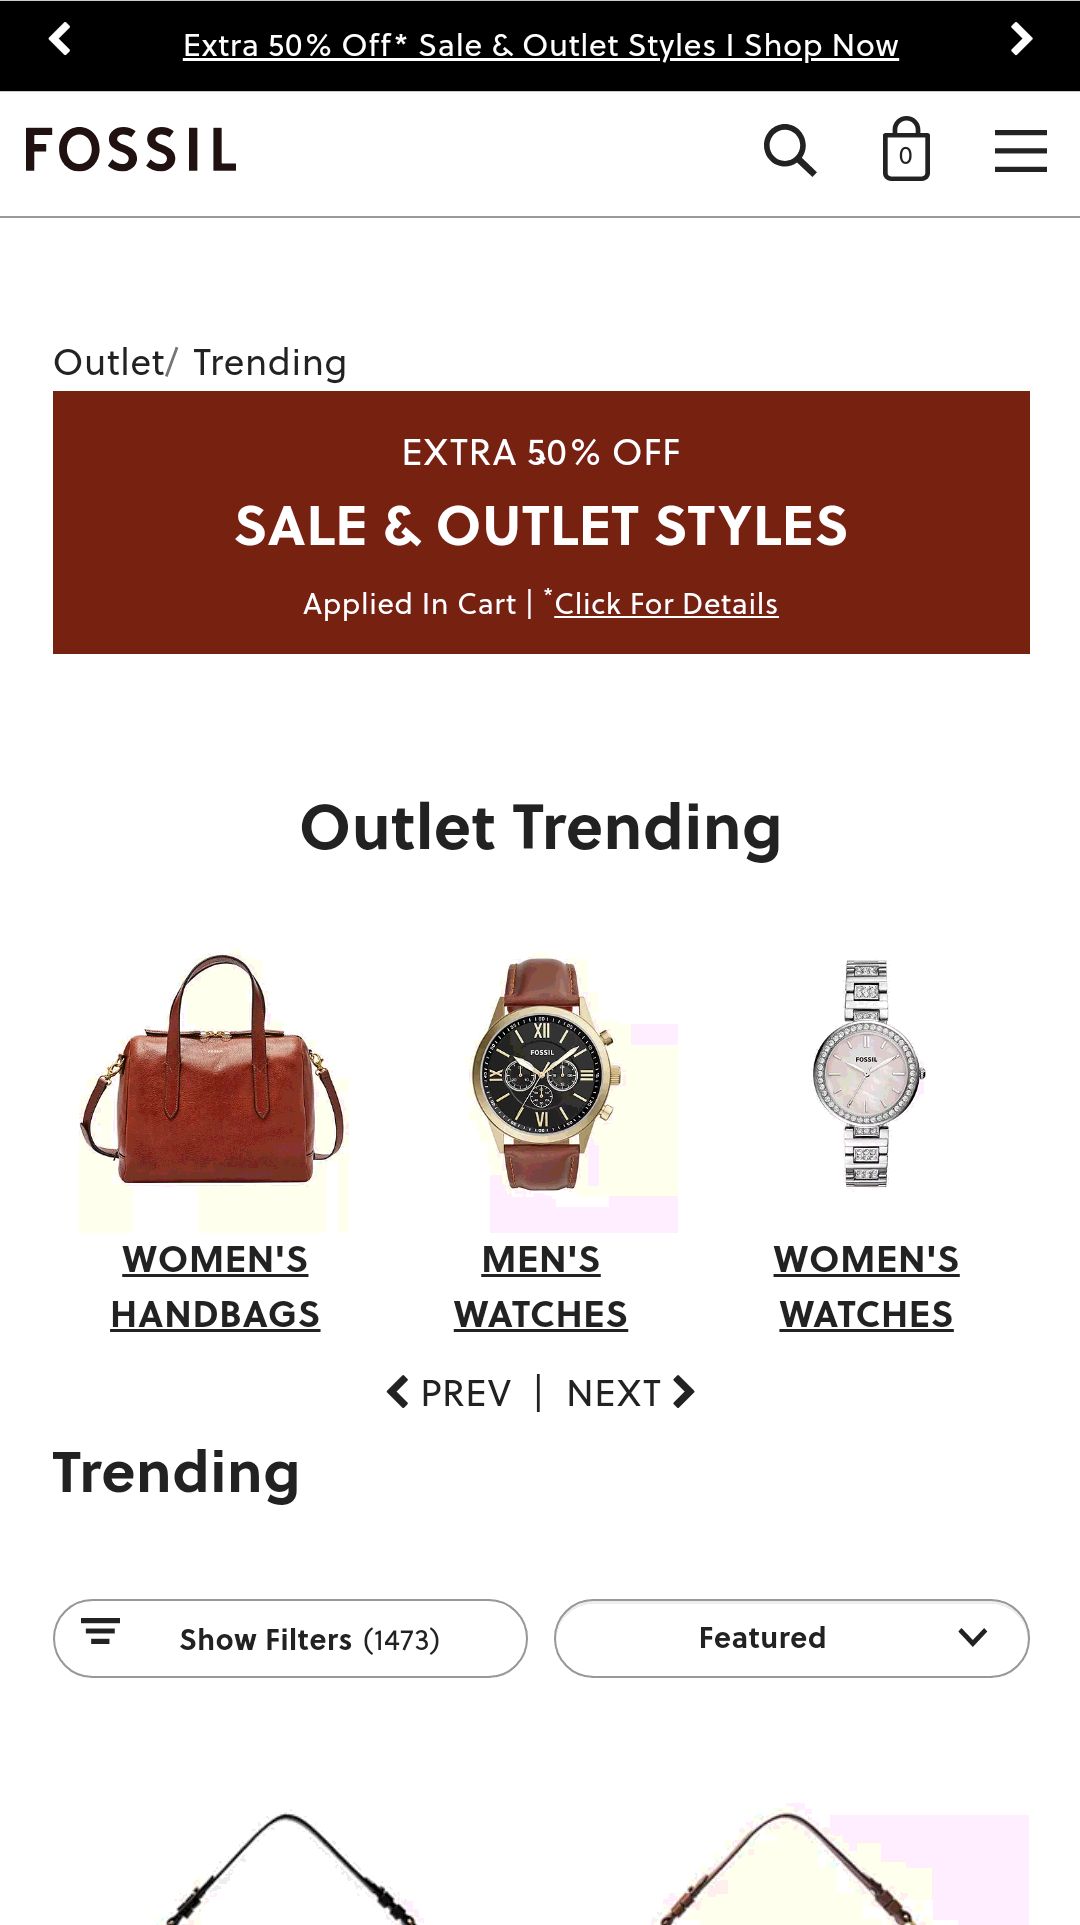 Now Trending For Fossil Outlet 
fossil清仓区额外5折